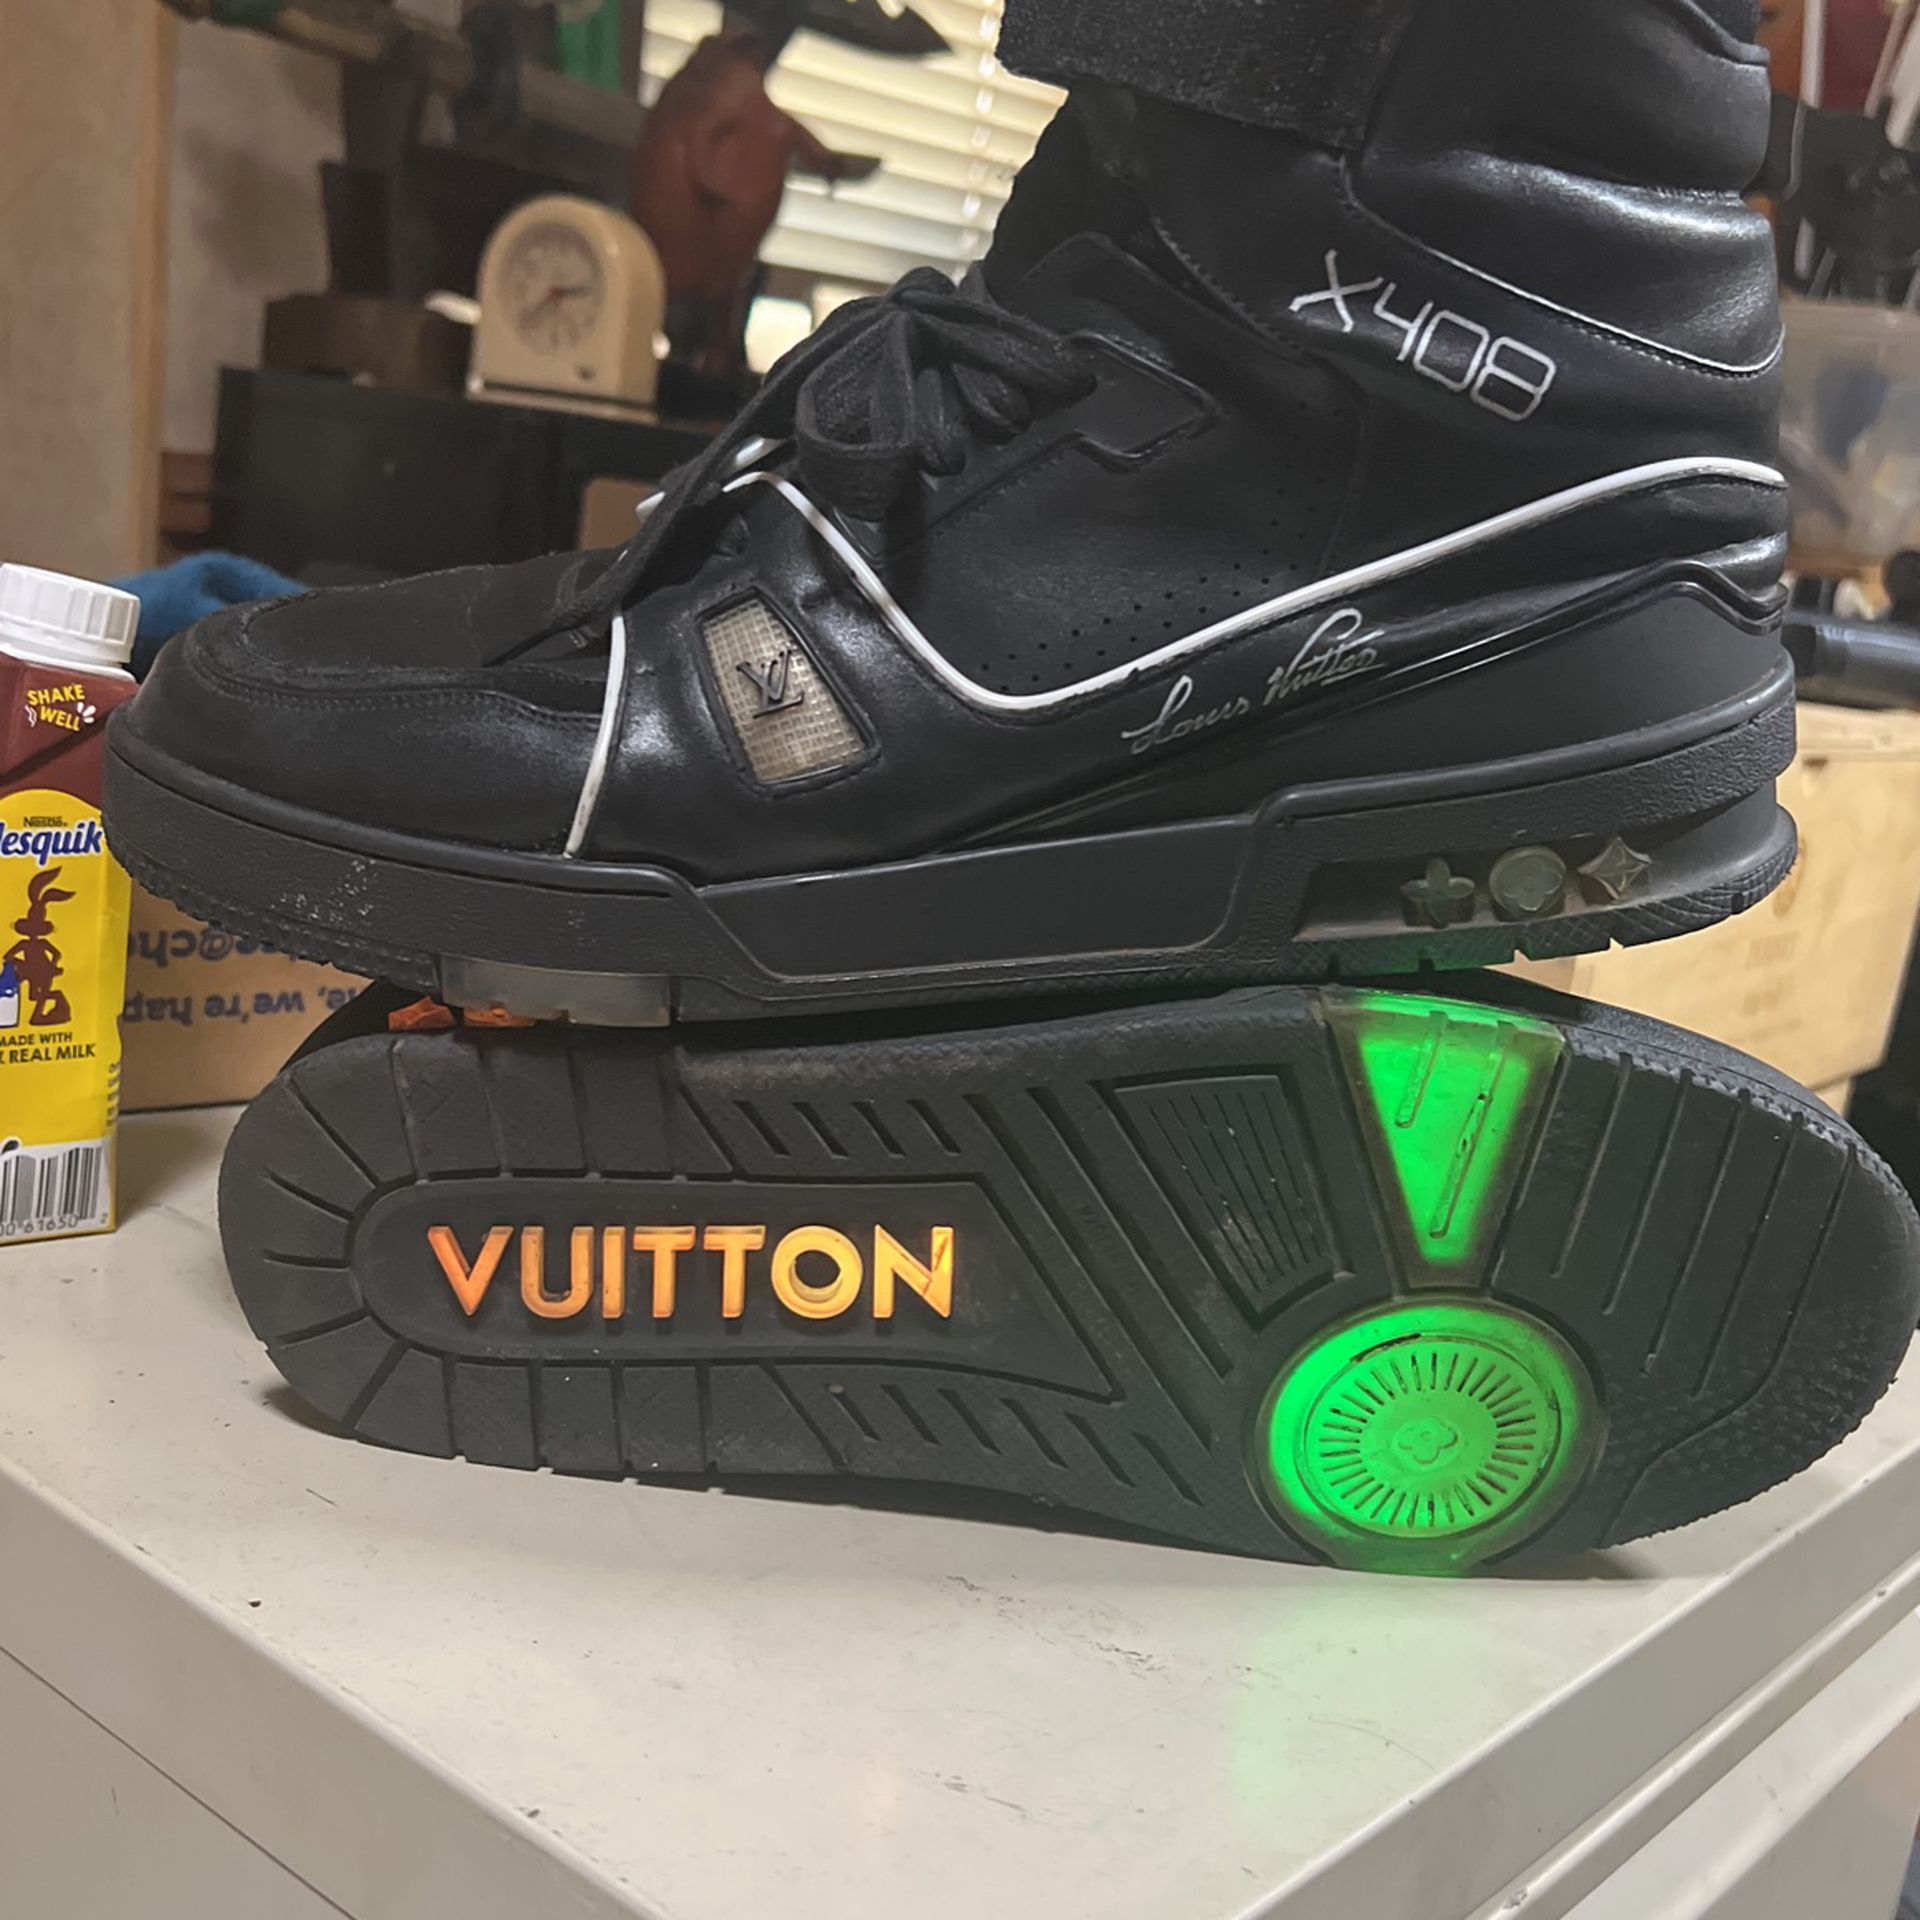 Loui Vuitton X408 for Sale in San Leandro, CA - OfferUp